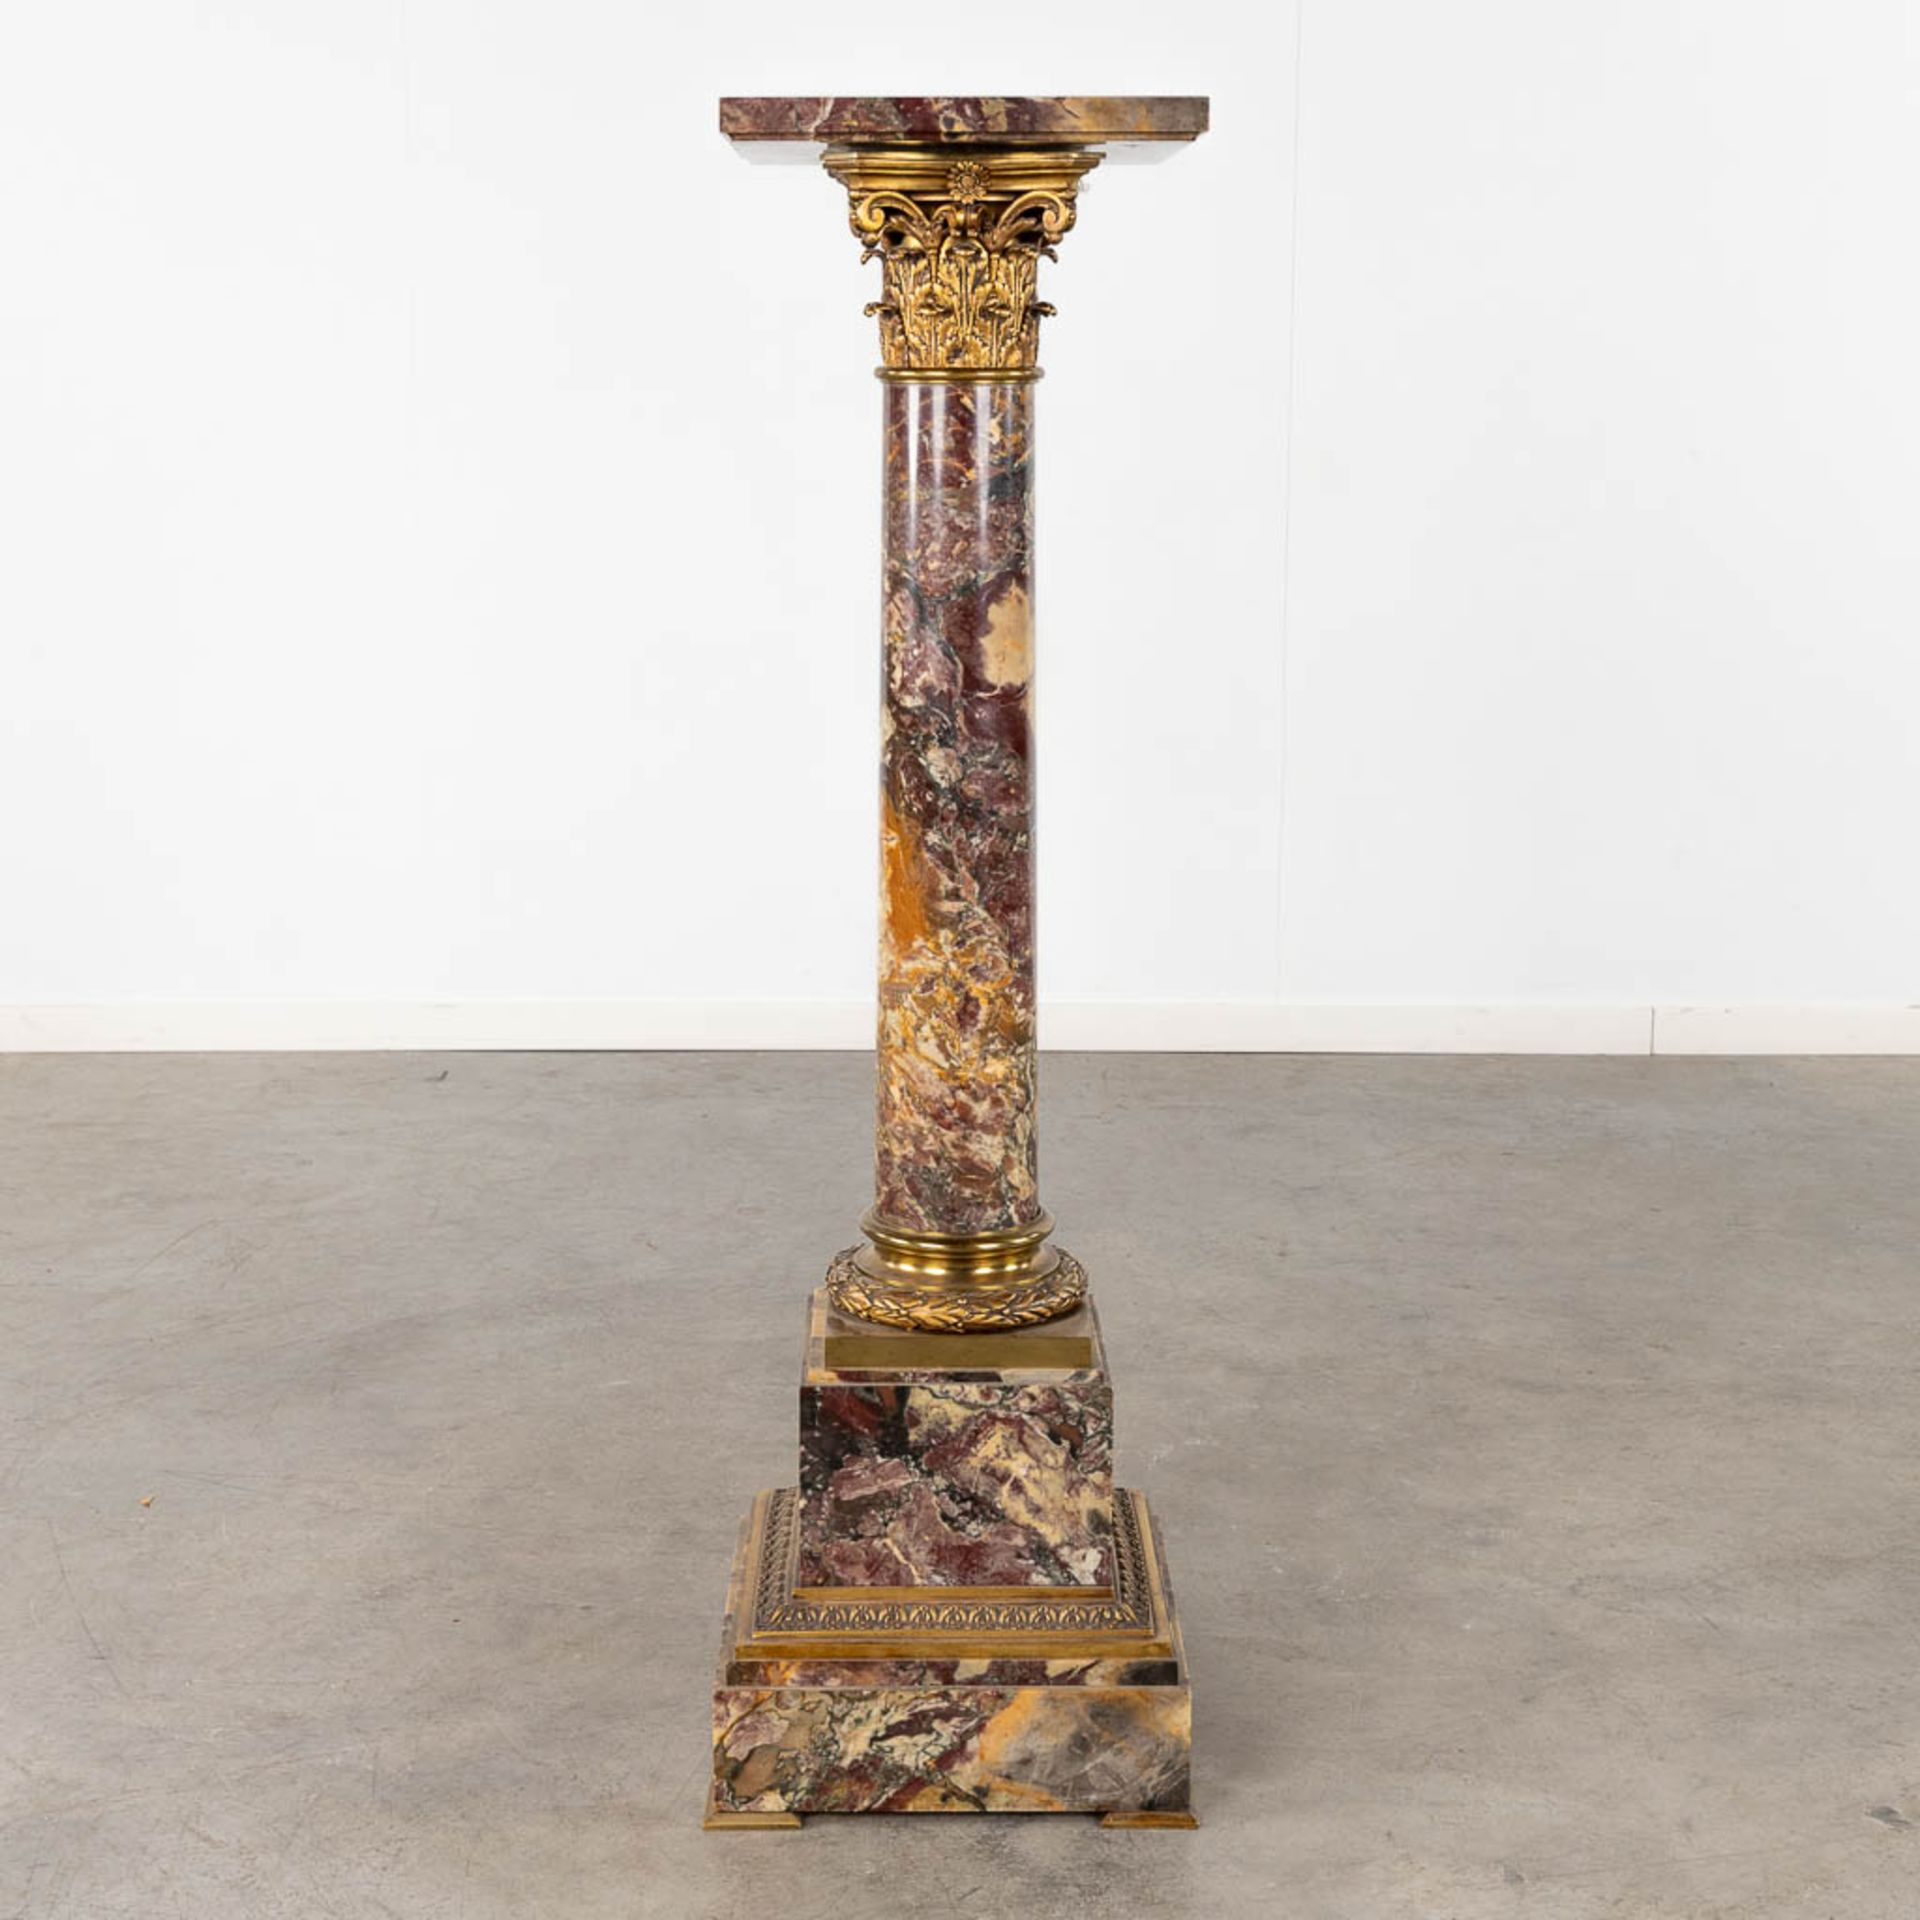 A pedestal, marble mounted with bronze in Corinthian style. Circa 1920. (D:35 x W:35 x H:120 cm) - Image 4 of 13